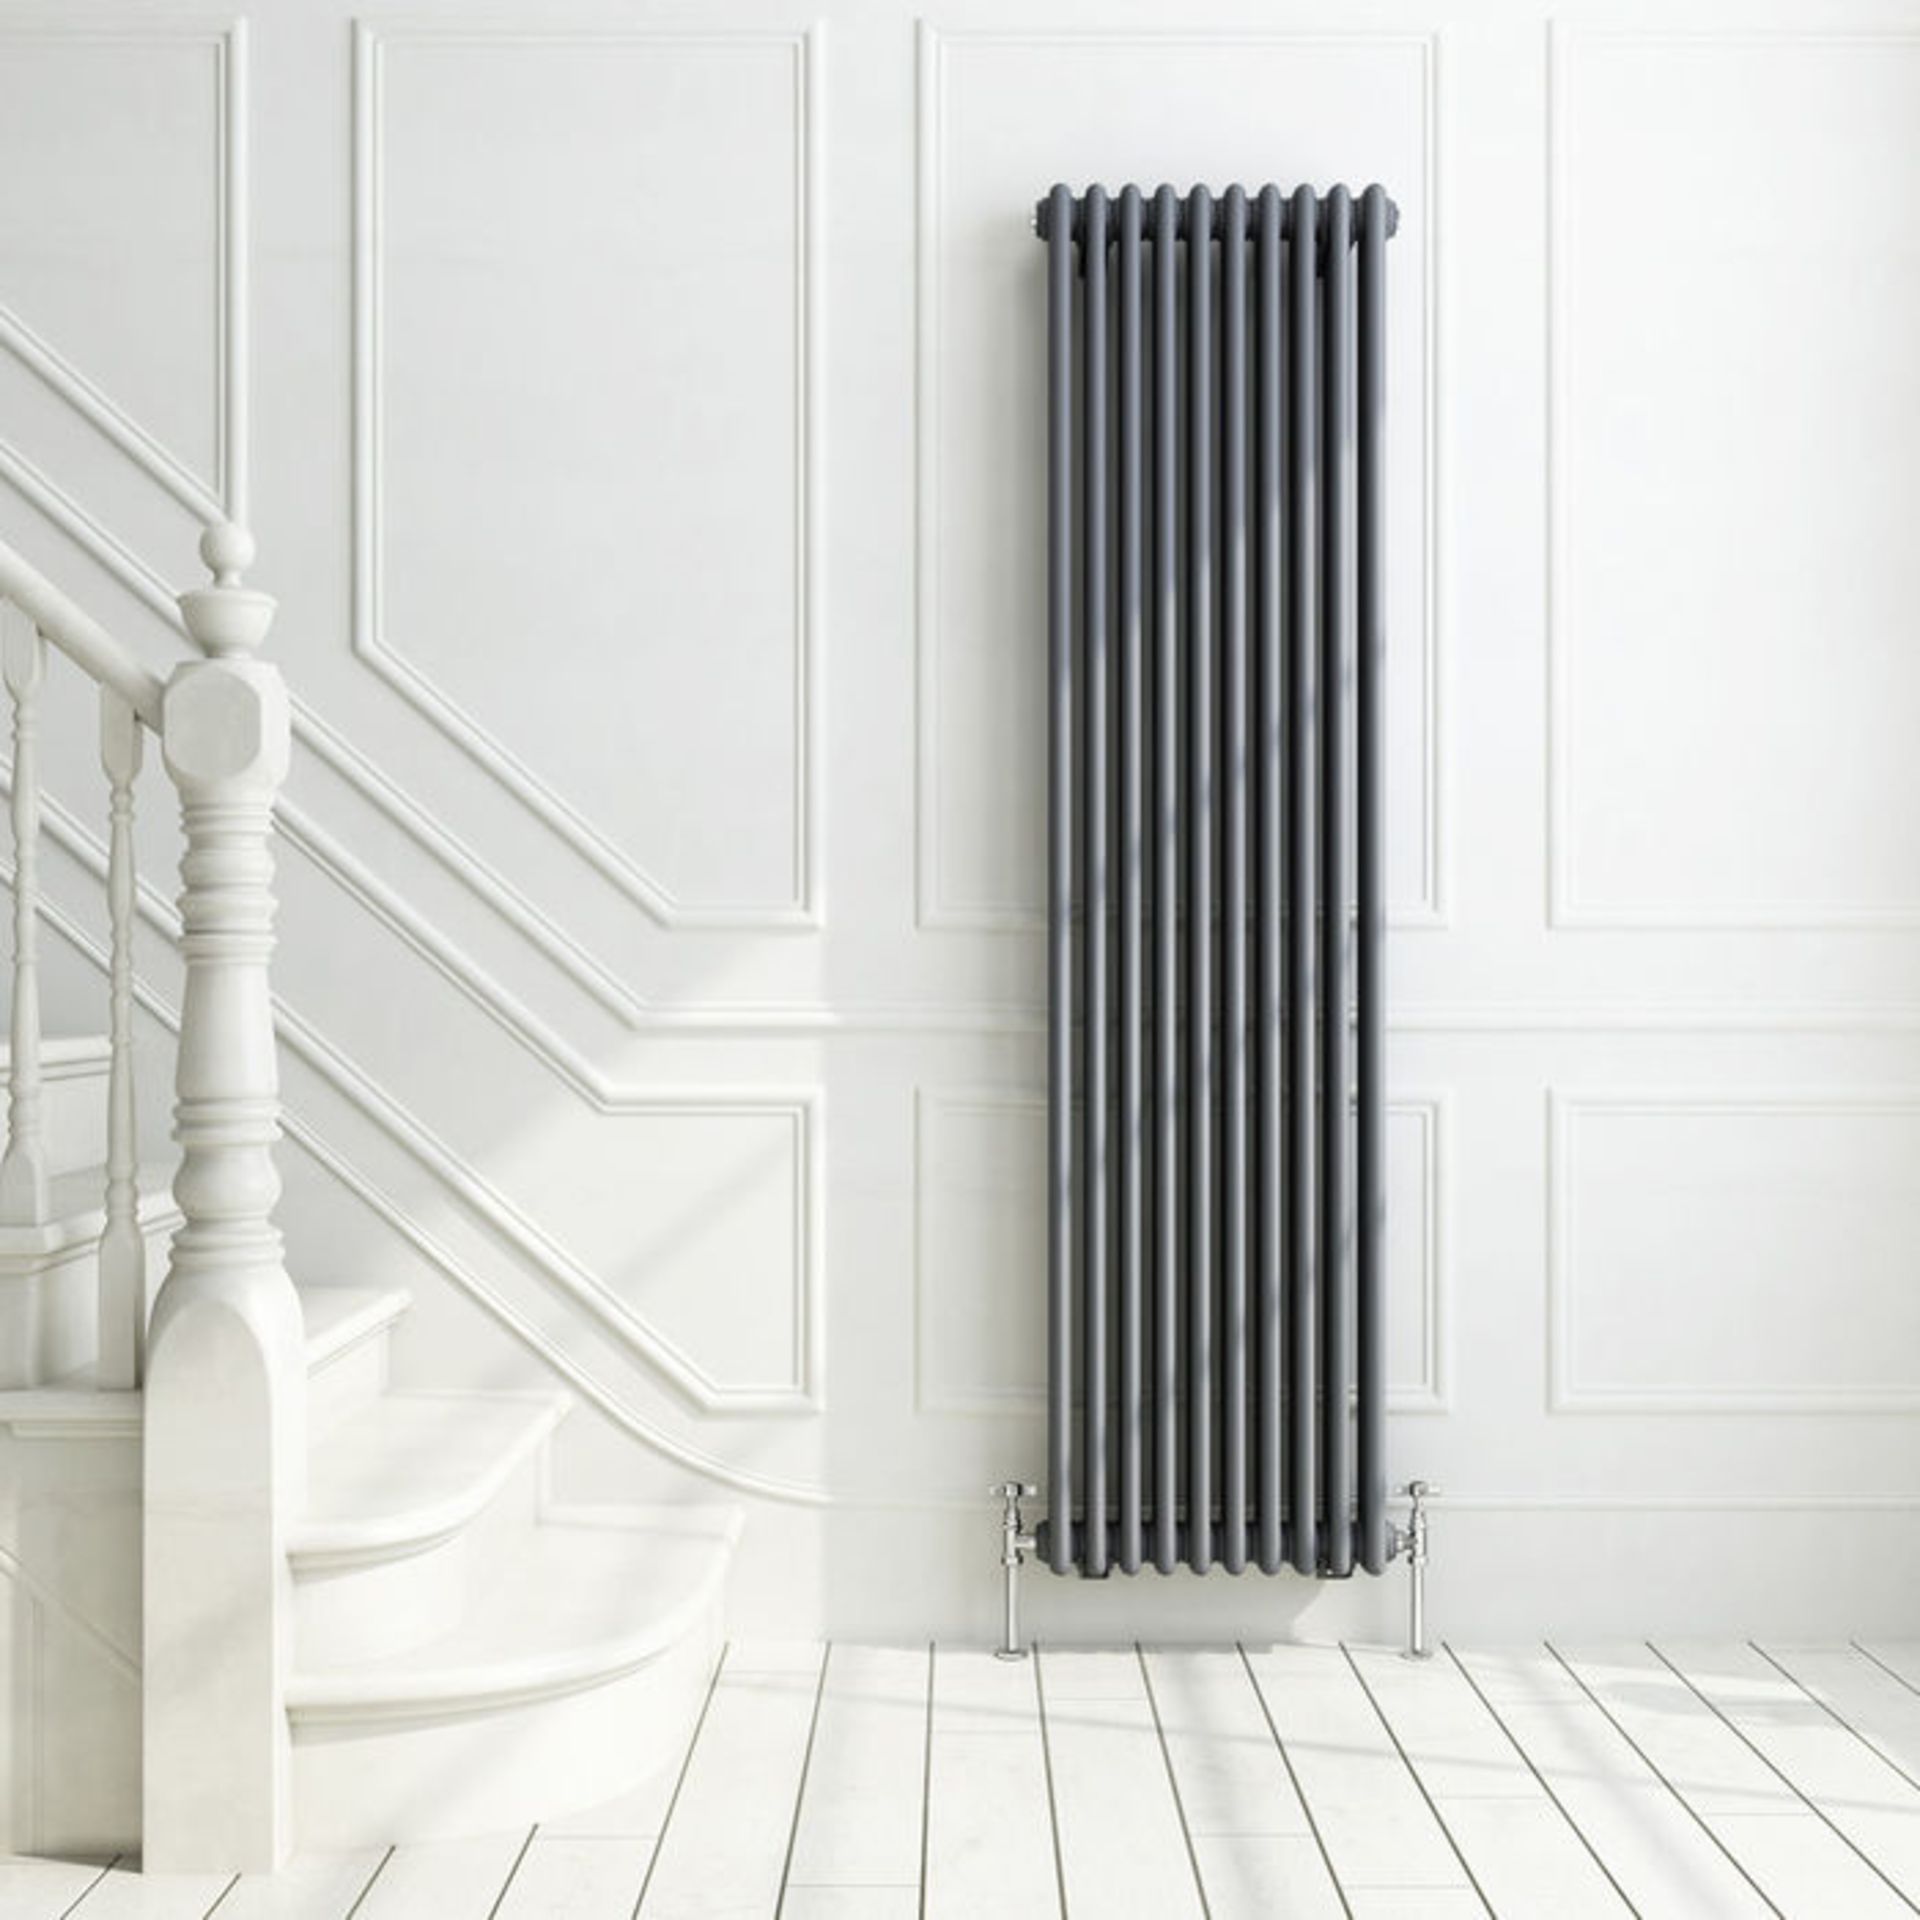 (O44) 1800x468mm Anthracite Triple Panel Vertical Colosseum Traditional Radiator. RRP £599.99. - Image 2 of 4